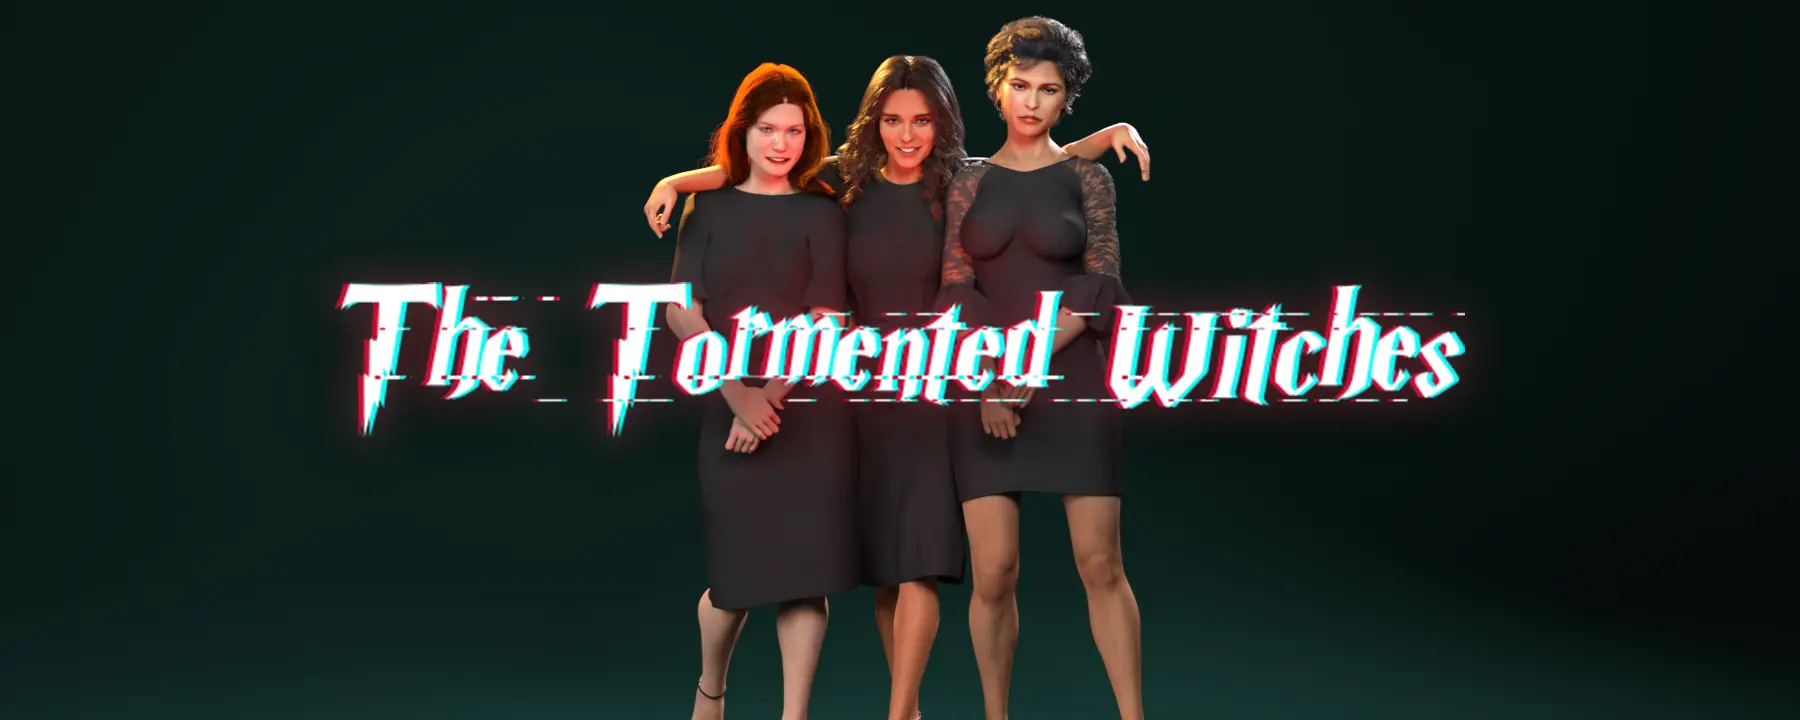 The Tormented Witches main image